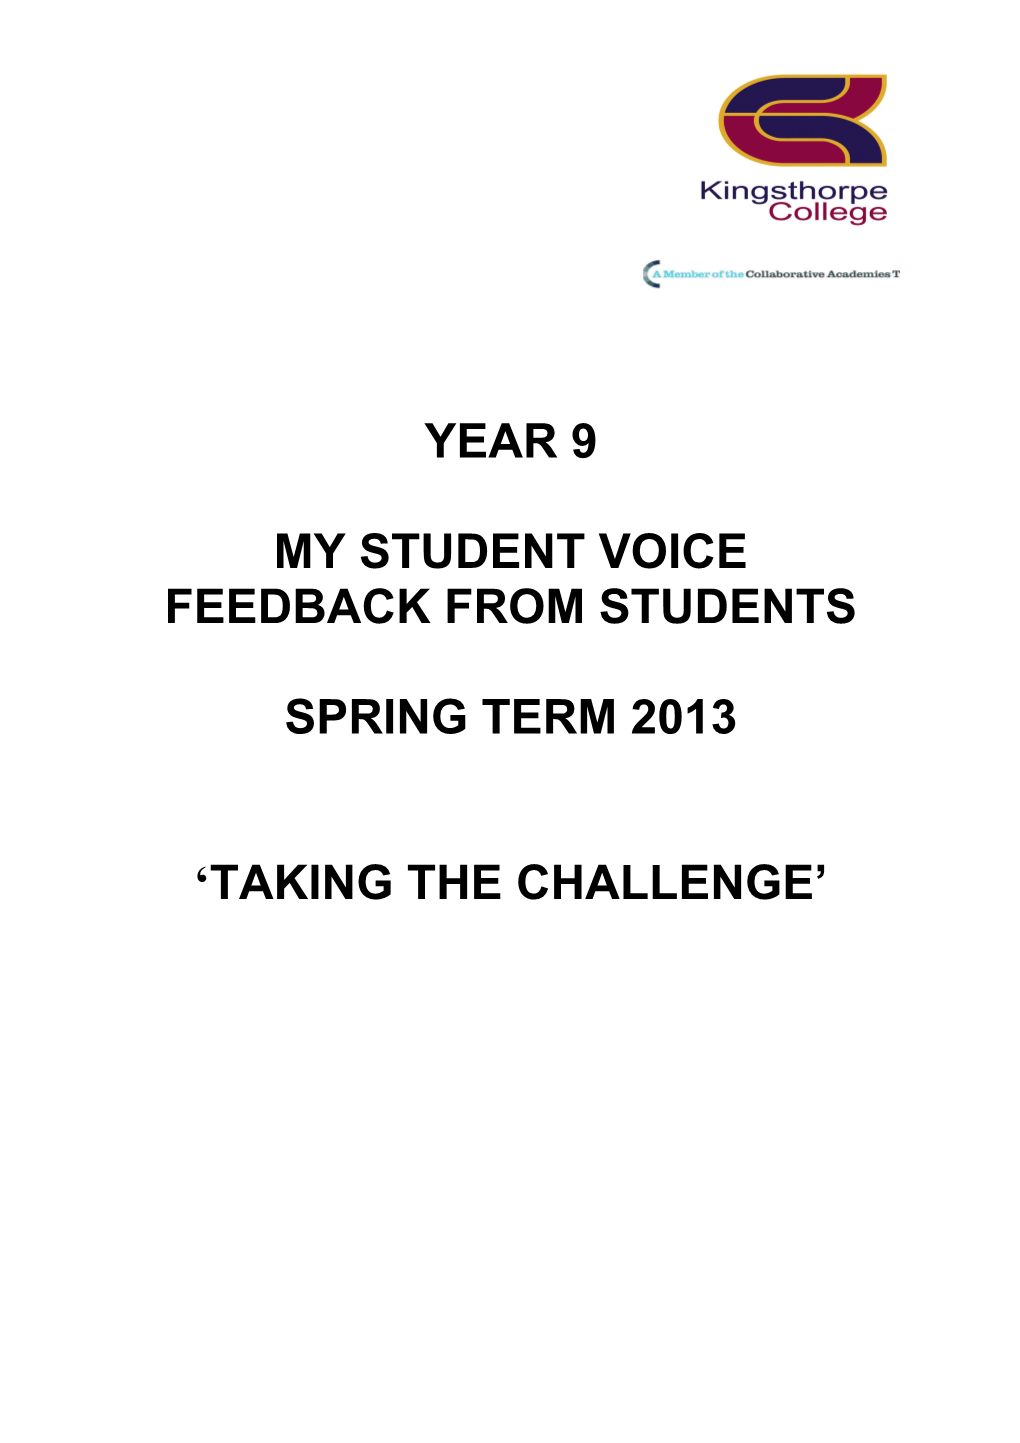 My Student Voice - Feedback from Students